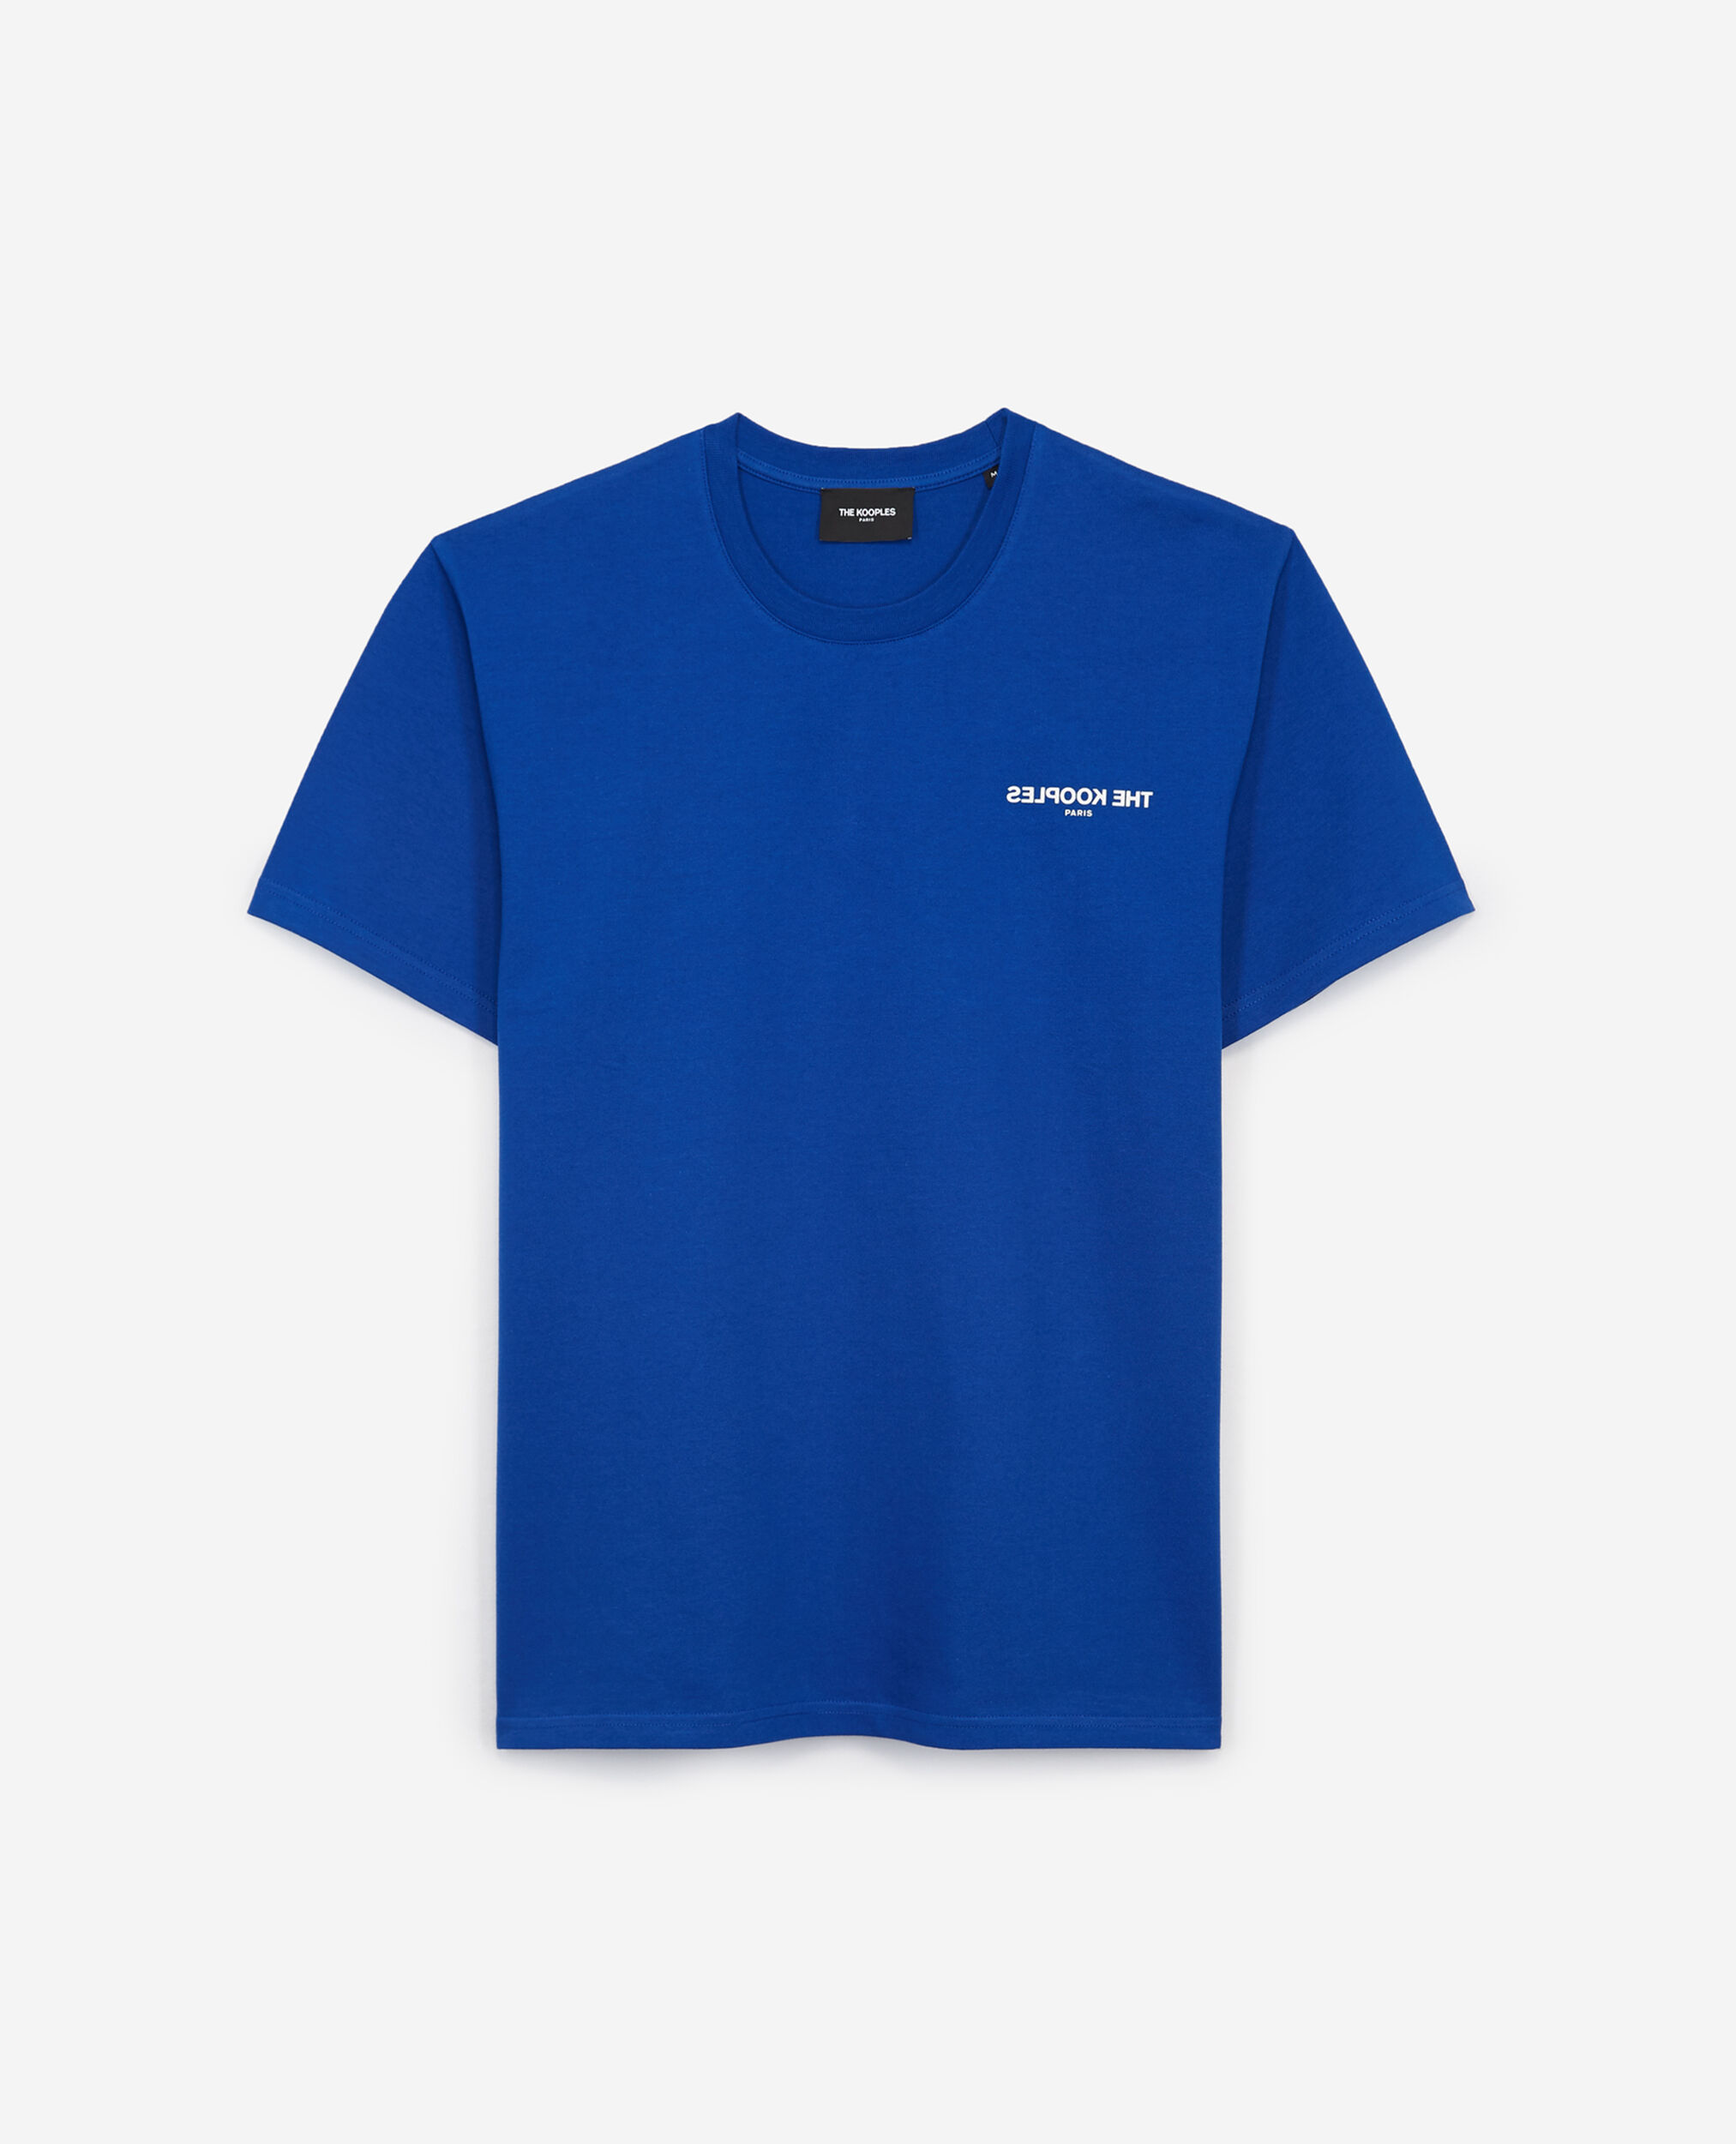 Blaues Baumwoll-T-Shirt mit The Kooples-Logo, ELECTRIC BLUE, hi-res image number null